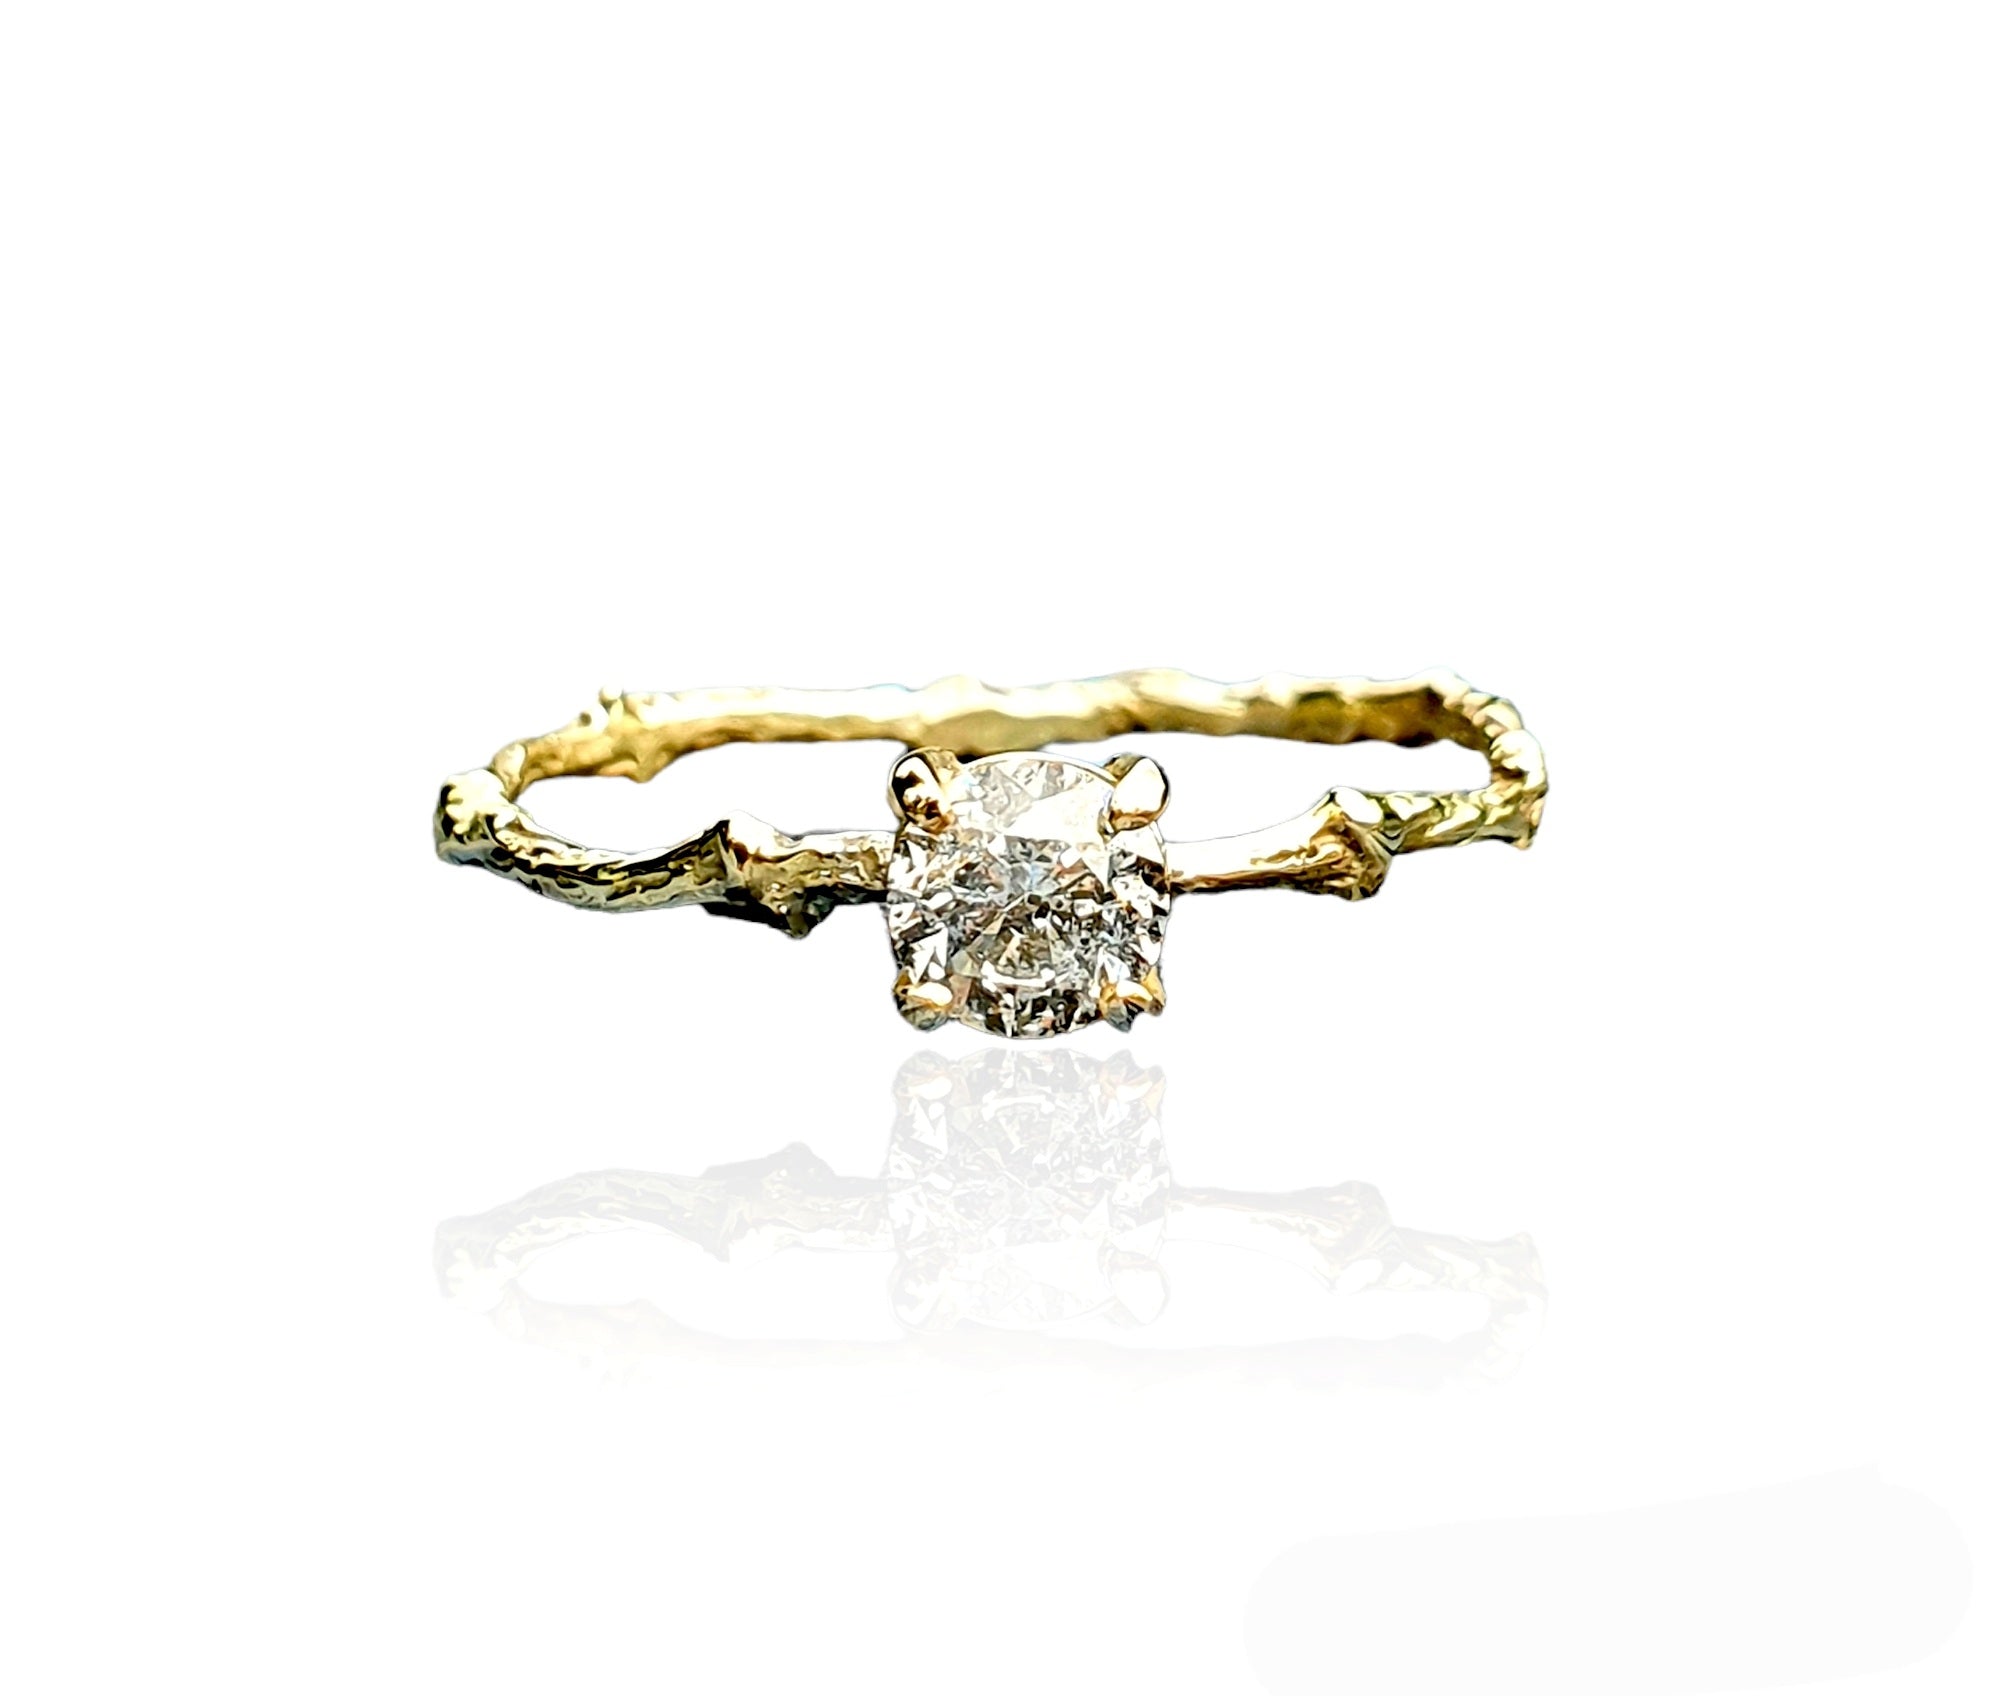 Twilight Twiglet Ring - 9k gold and salt and pepper diamond ring